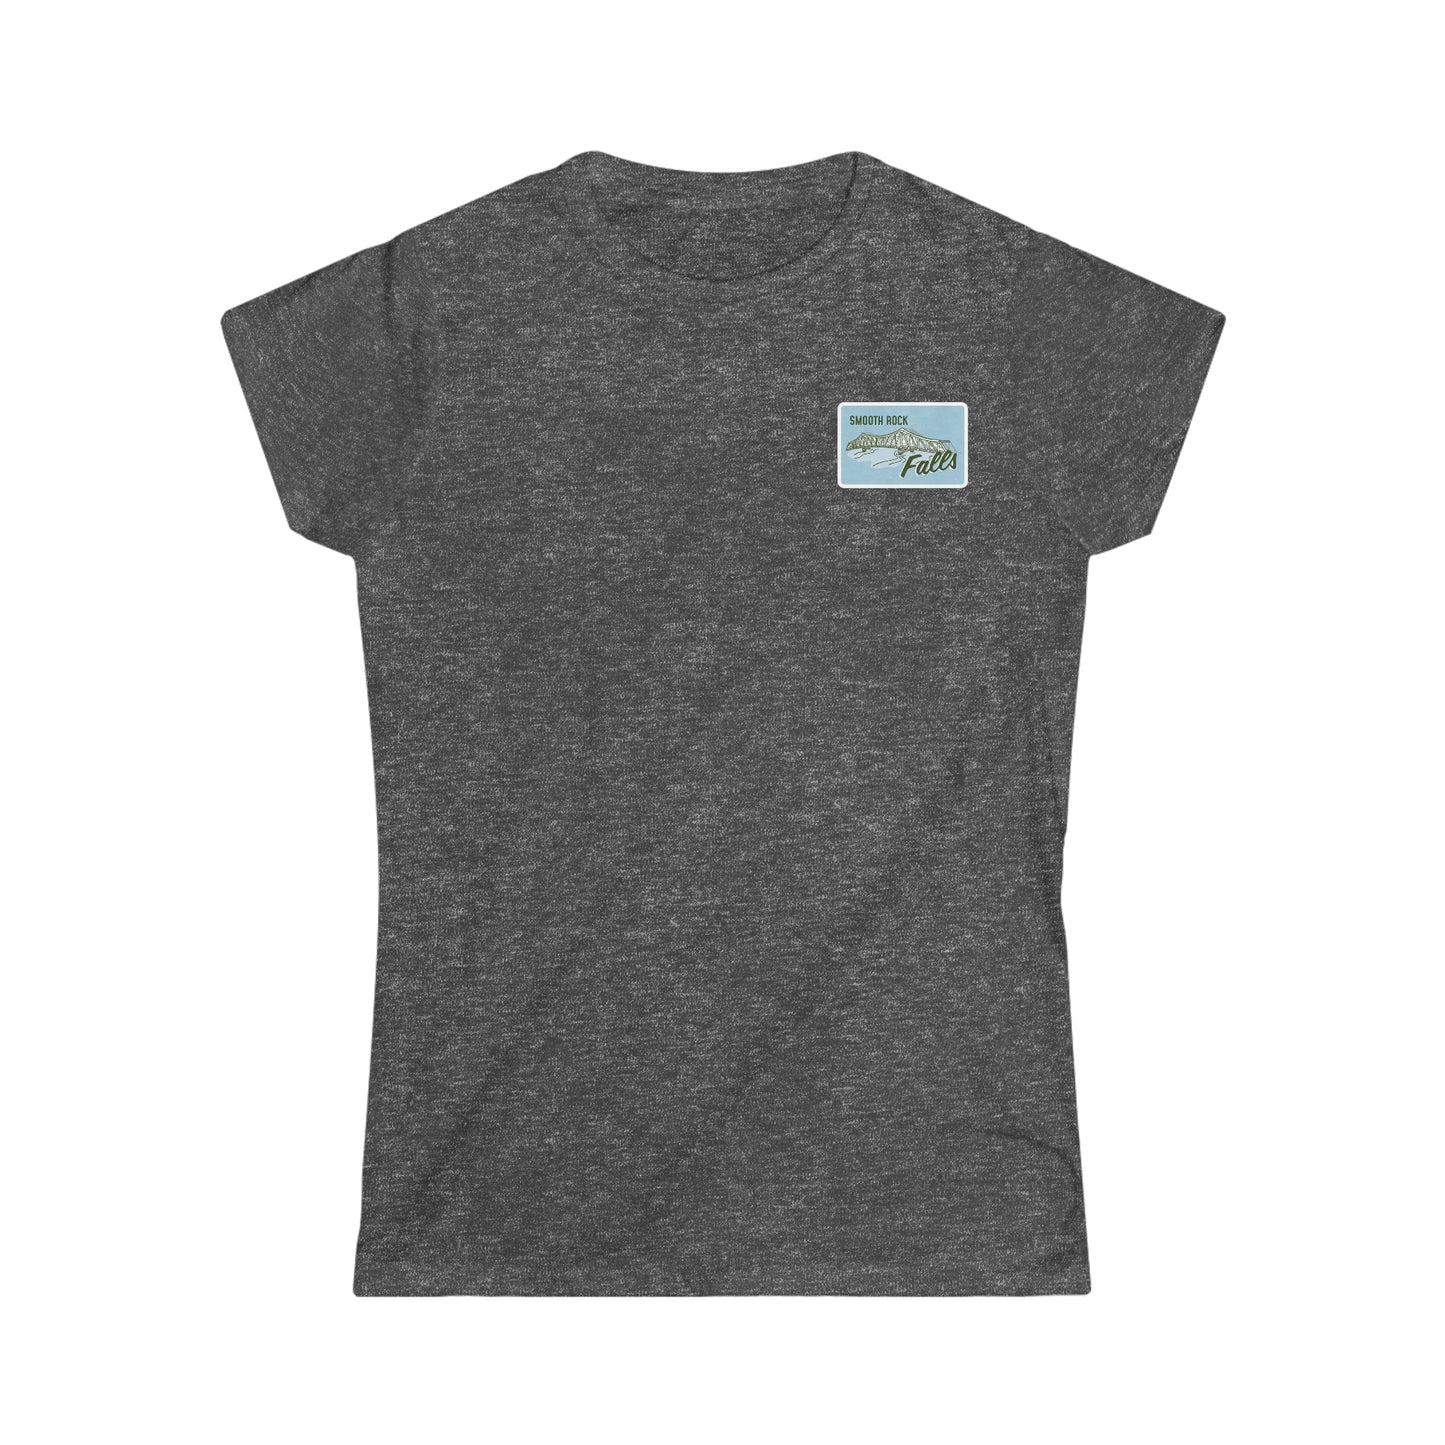 Smooth Rock Falls - Women's Graphic Tee